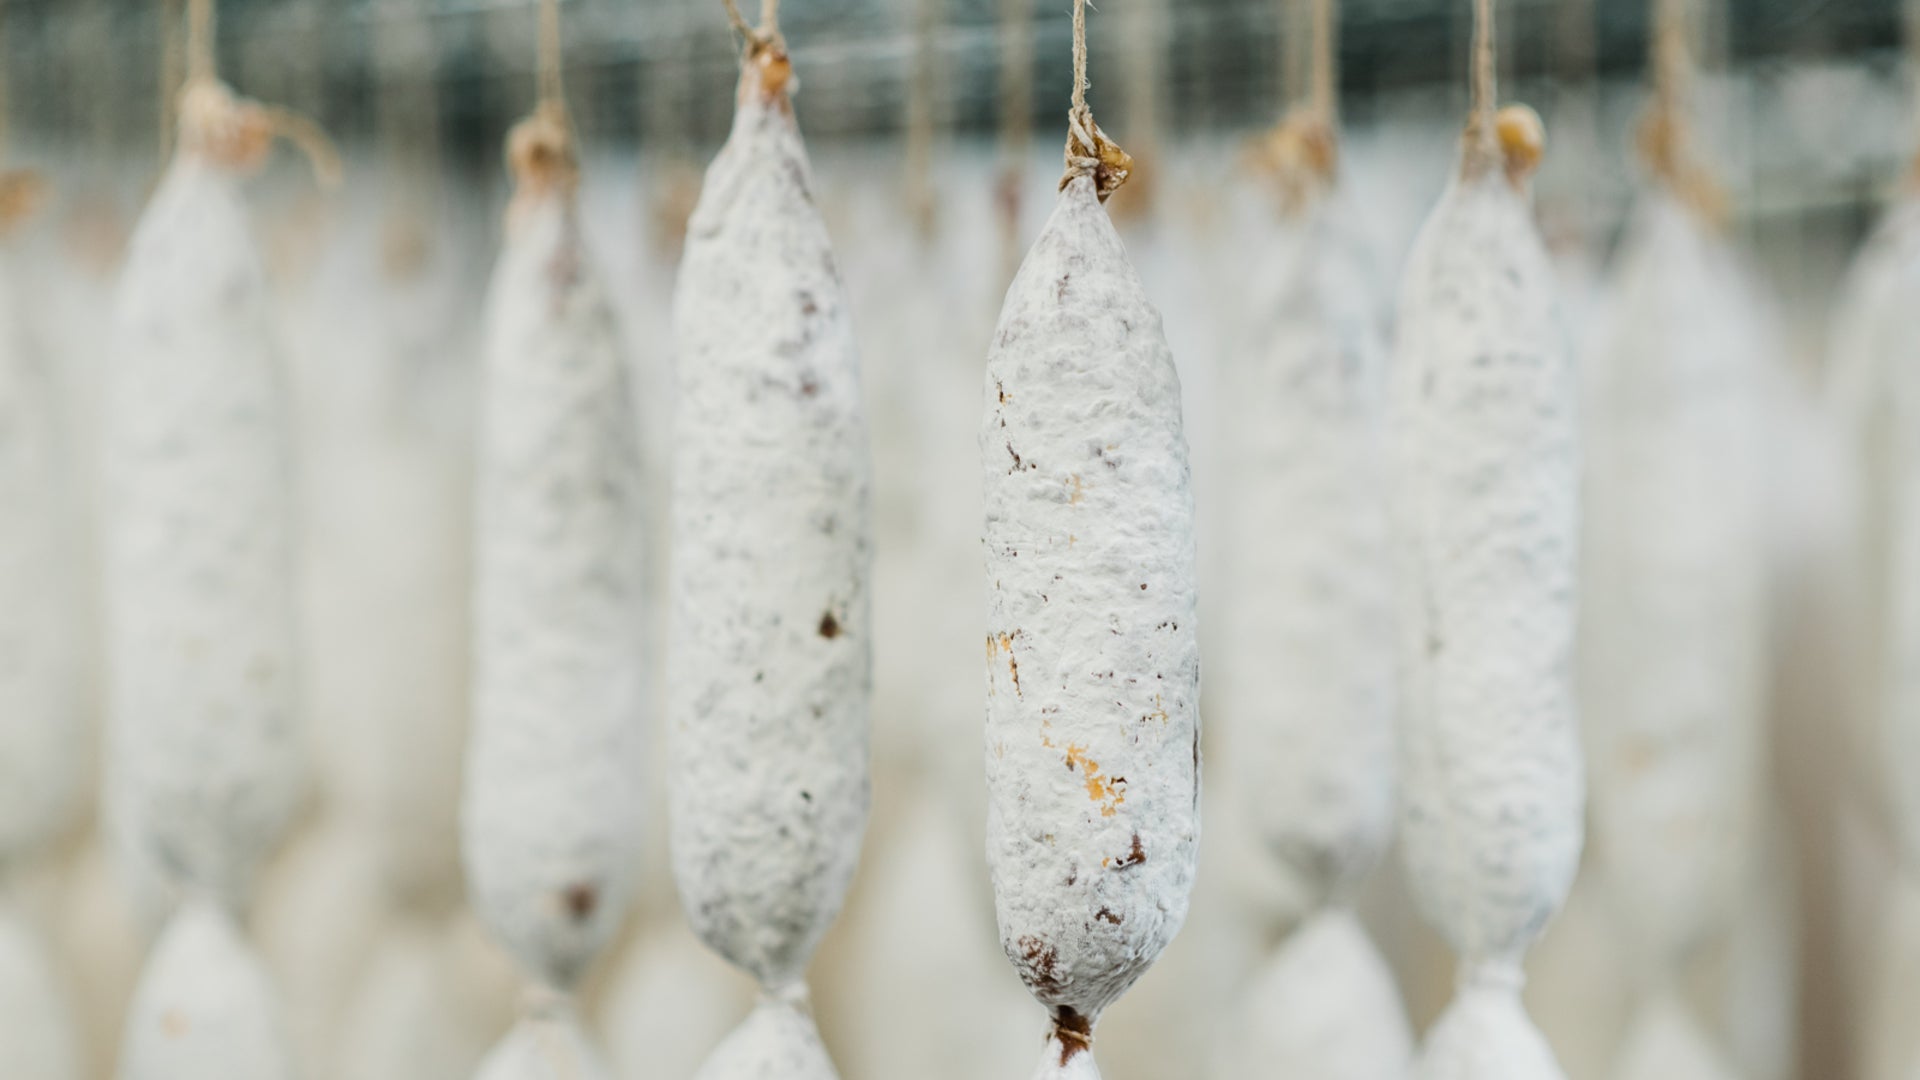 A close up picture of salami hanging in the drying room to show the salami's protective white mold.